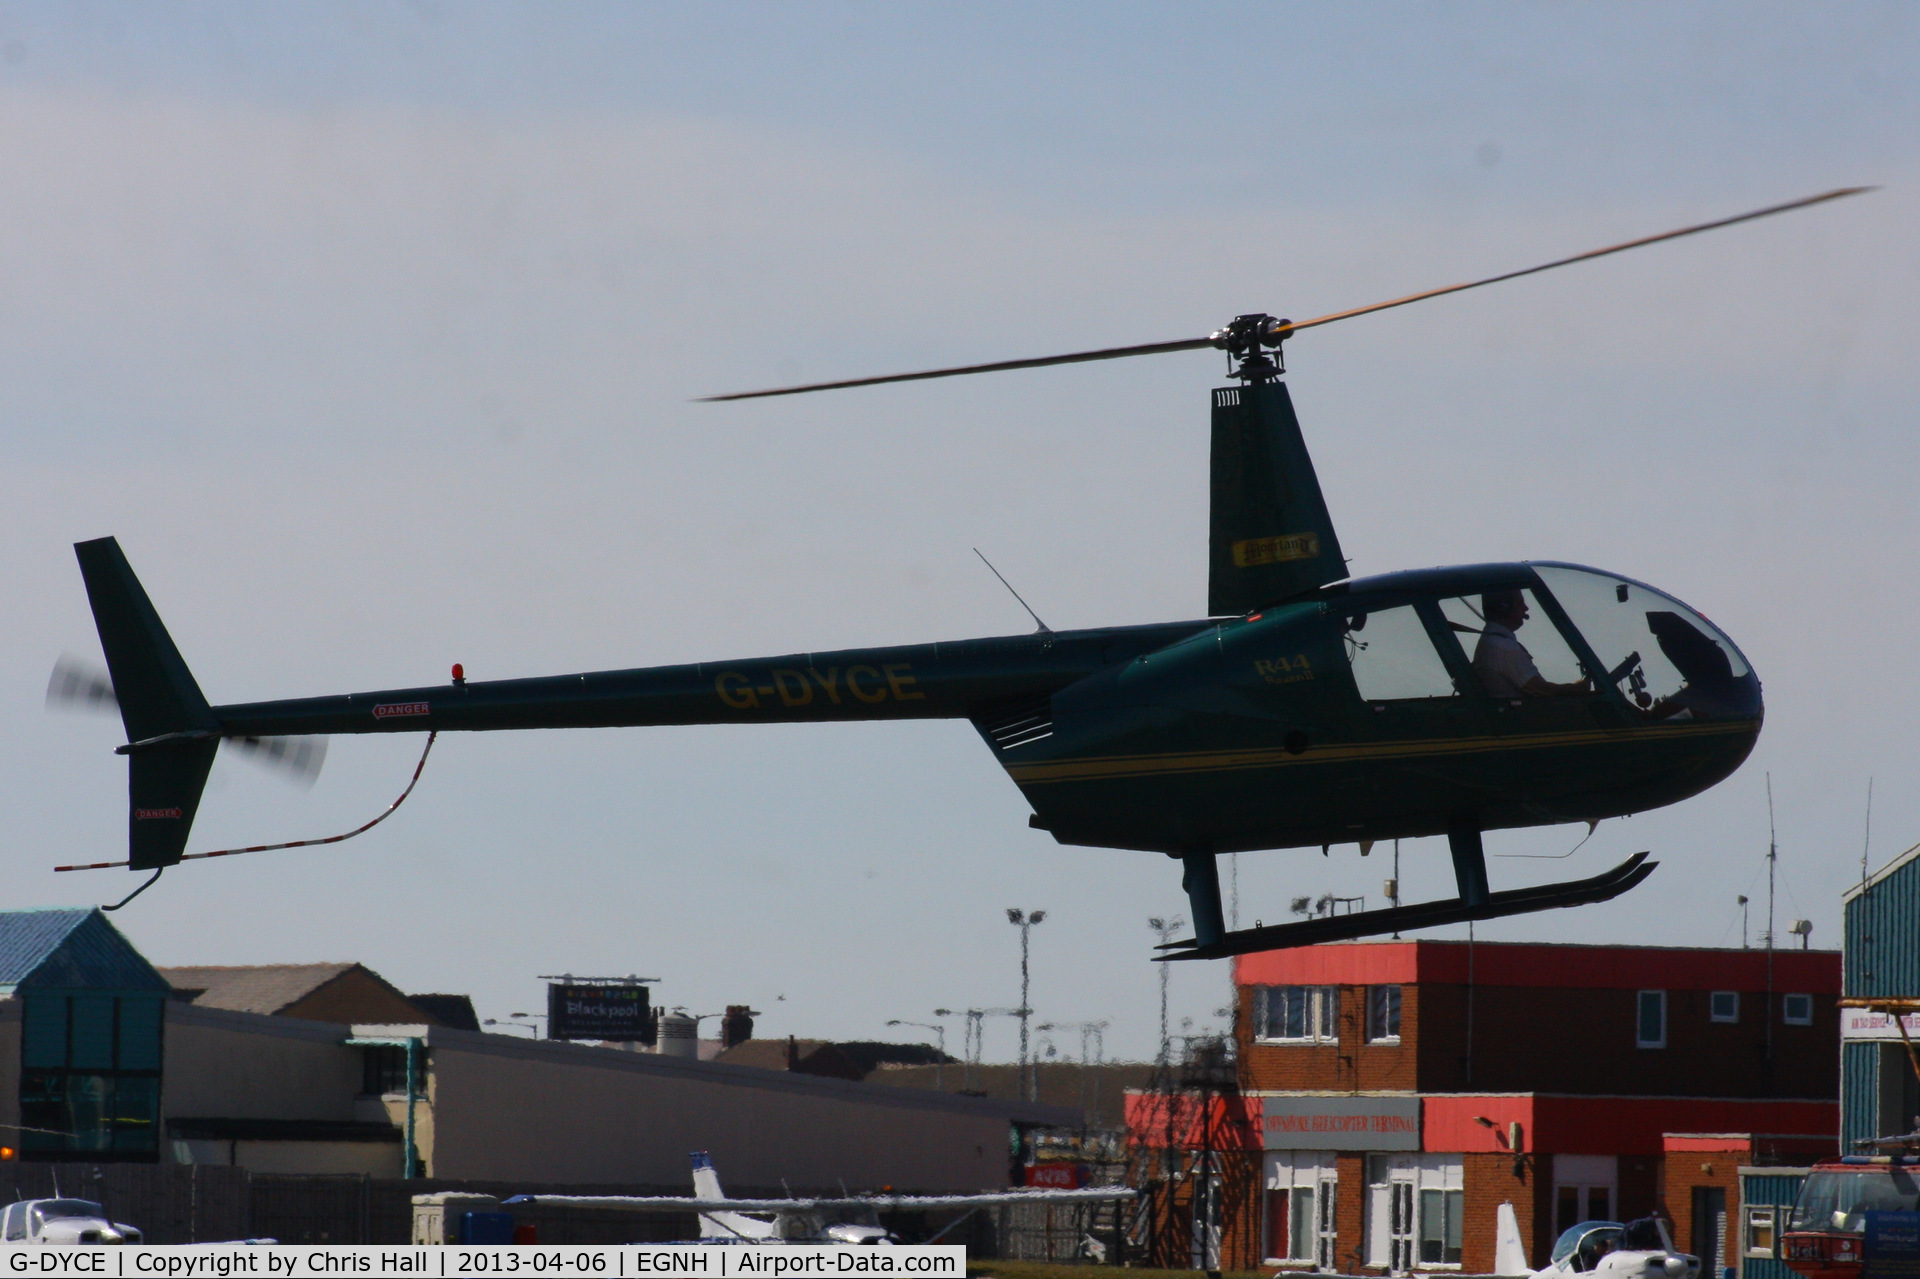 G-DYCE, 2003 Robinson R44 Raven II C/N 10148, privately owned